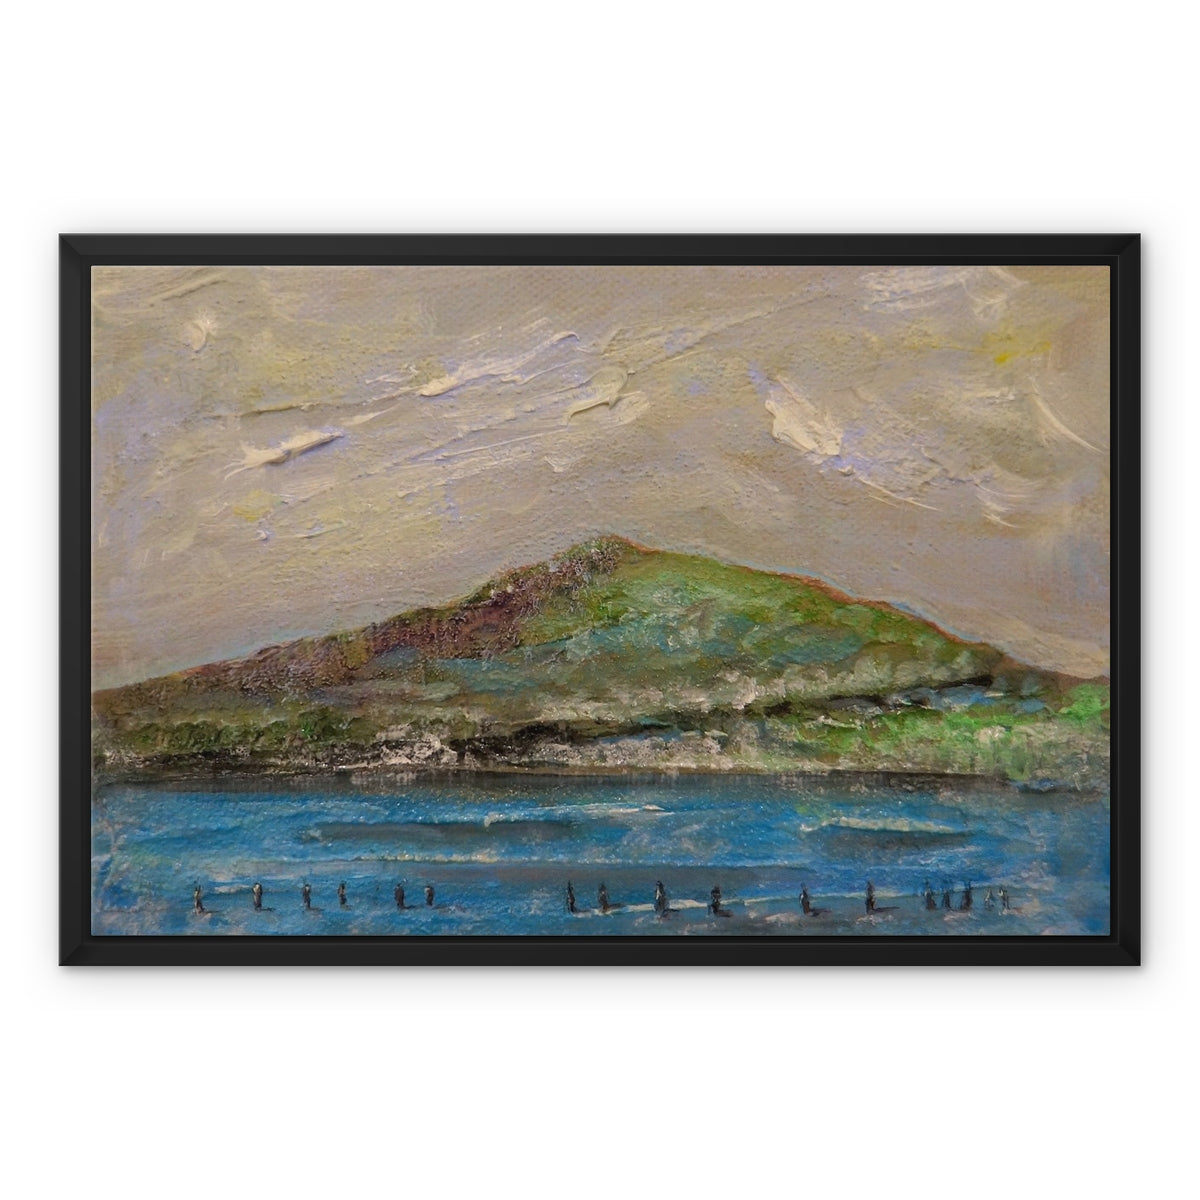 Ben Lomond iii Painting | Framed Canvas-Floating Framed Canvas Prints-Scottish Lochs & Mountains Art Gallery-24"x18"-Black Frame-Paintings, Prints, Homeware, Art Gifts From Scotland By Scottish Artist Kevin Hunter